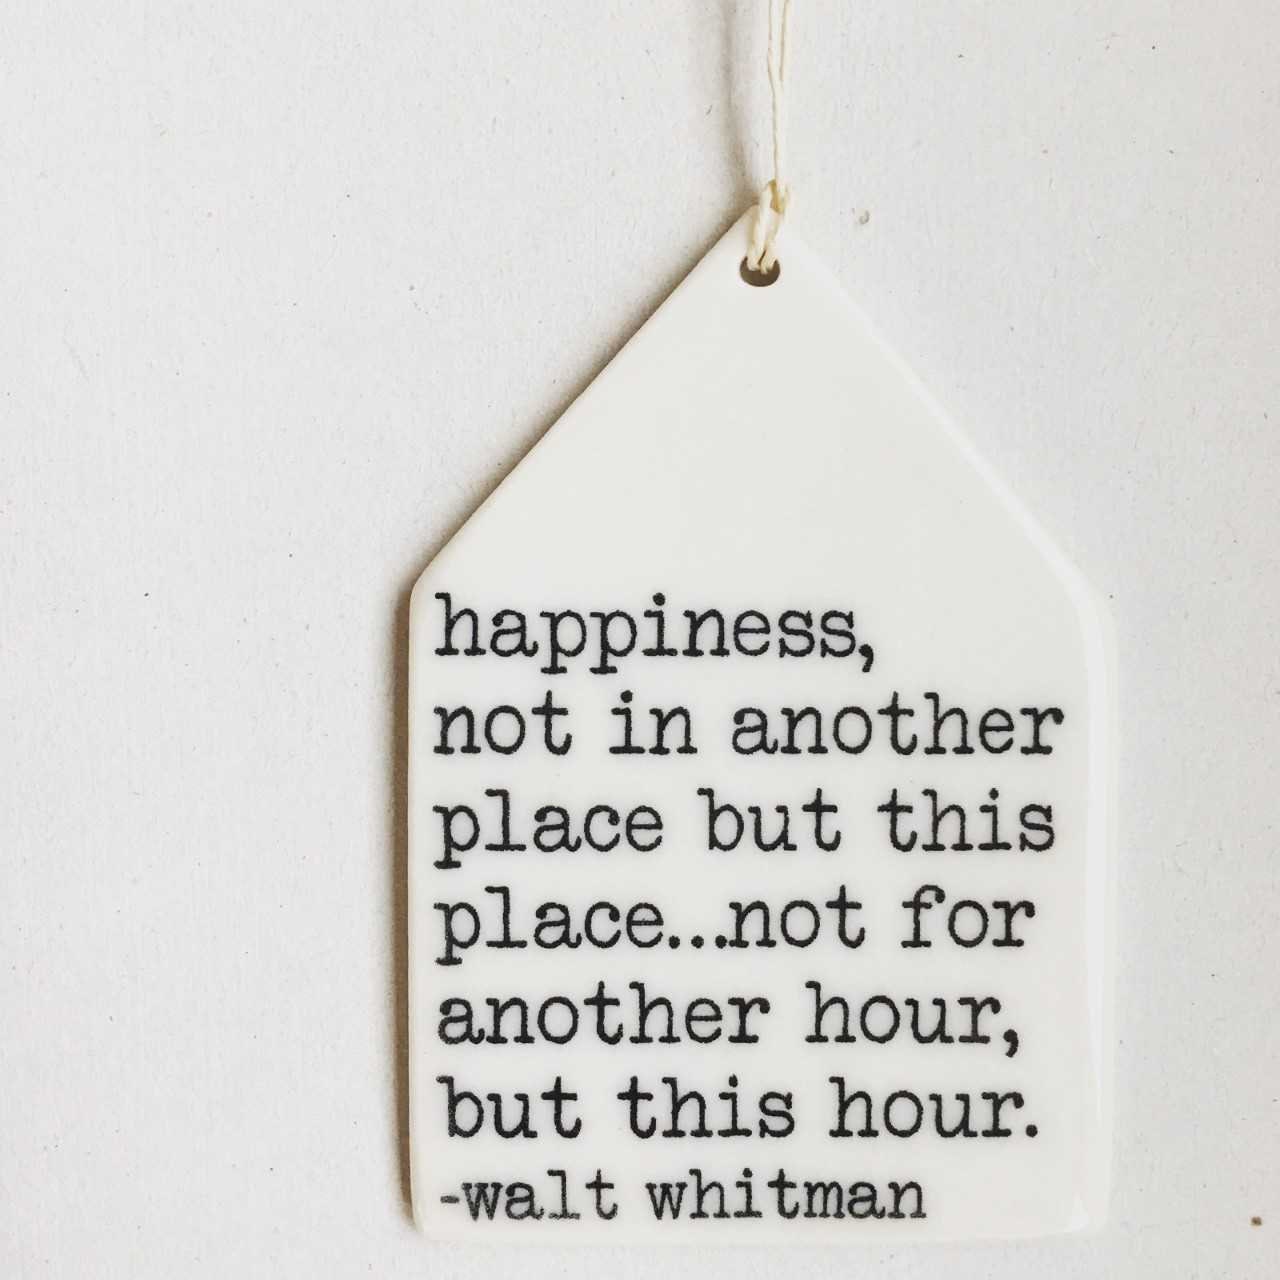 walt whitman quote | ceramic wall tag | ceramic wall art | minimalist screenprinted ceramics | meaningful gift | poetry | be here now